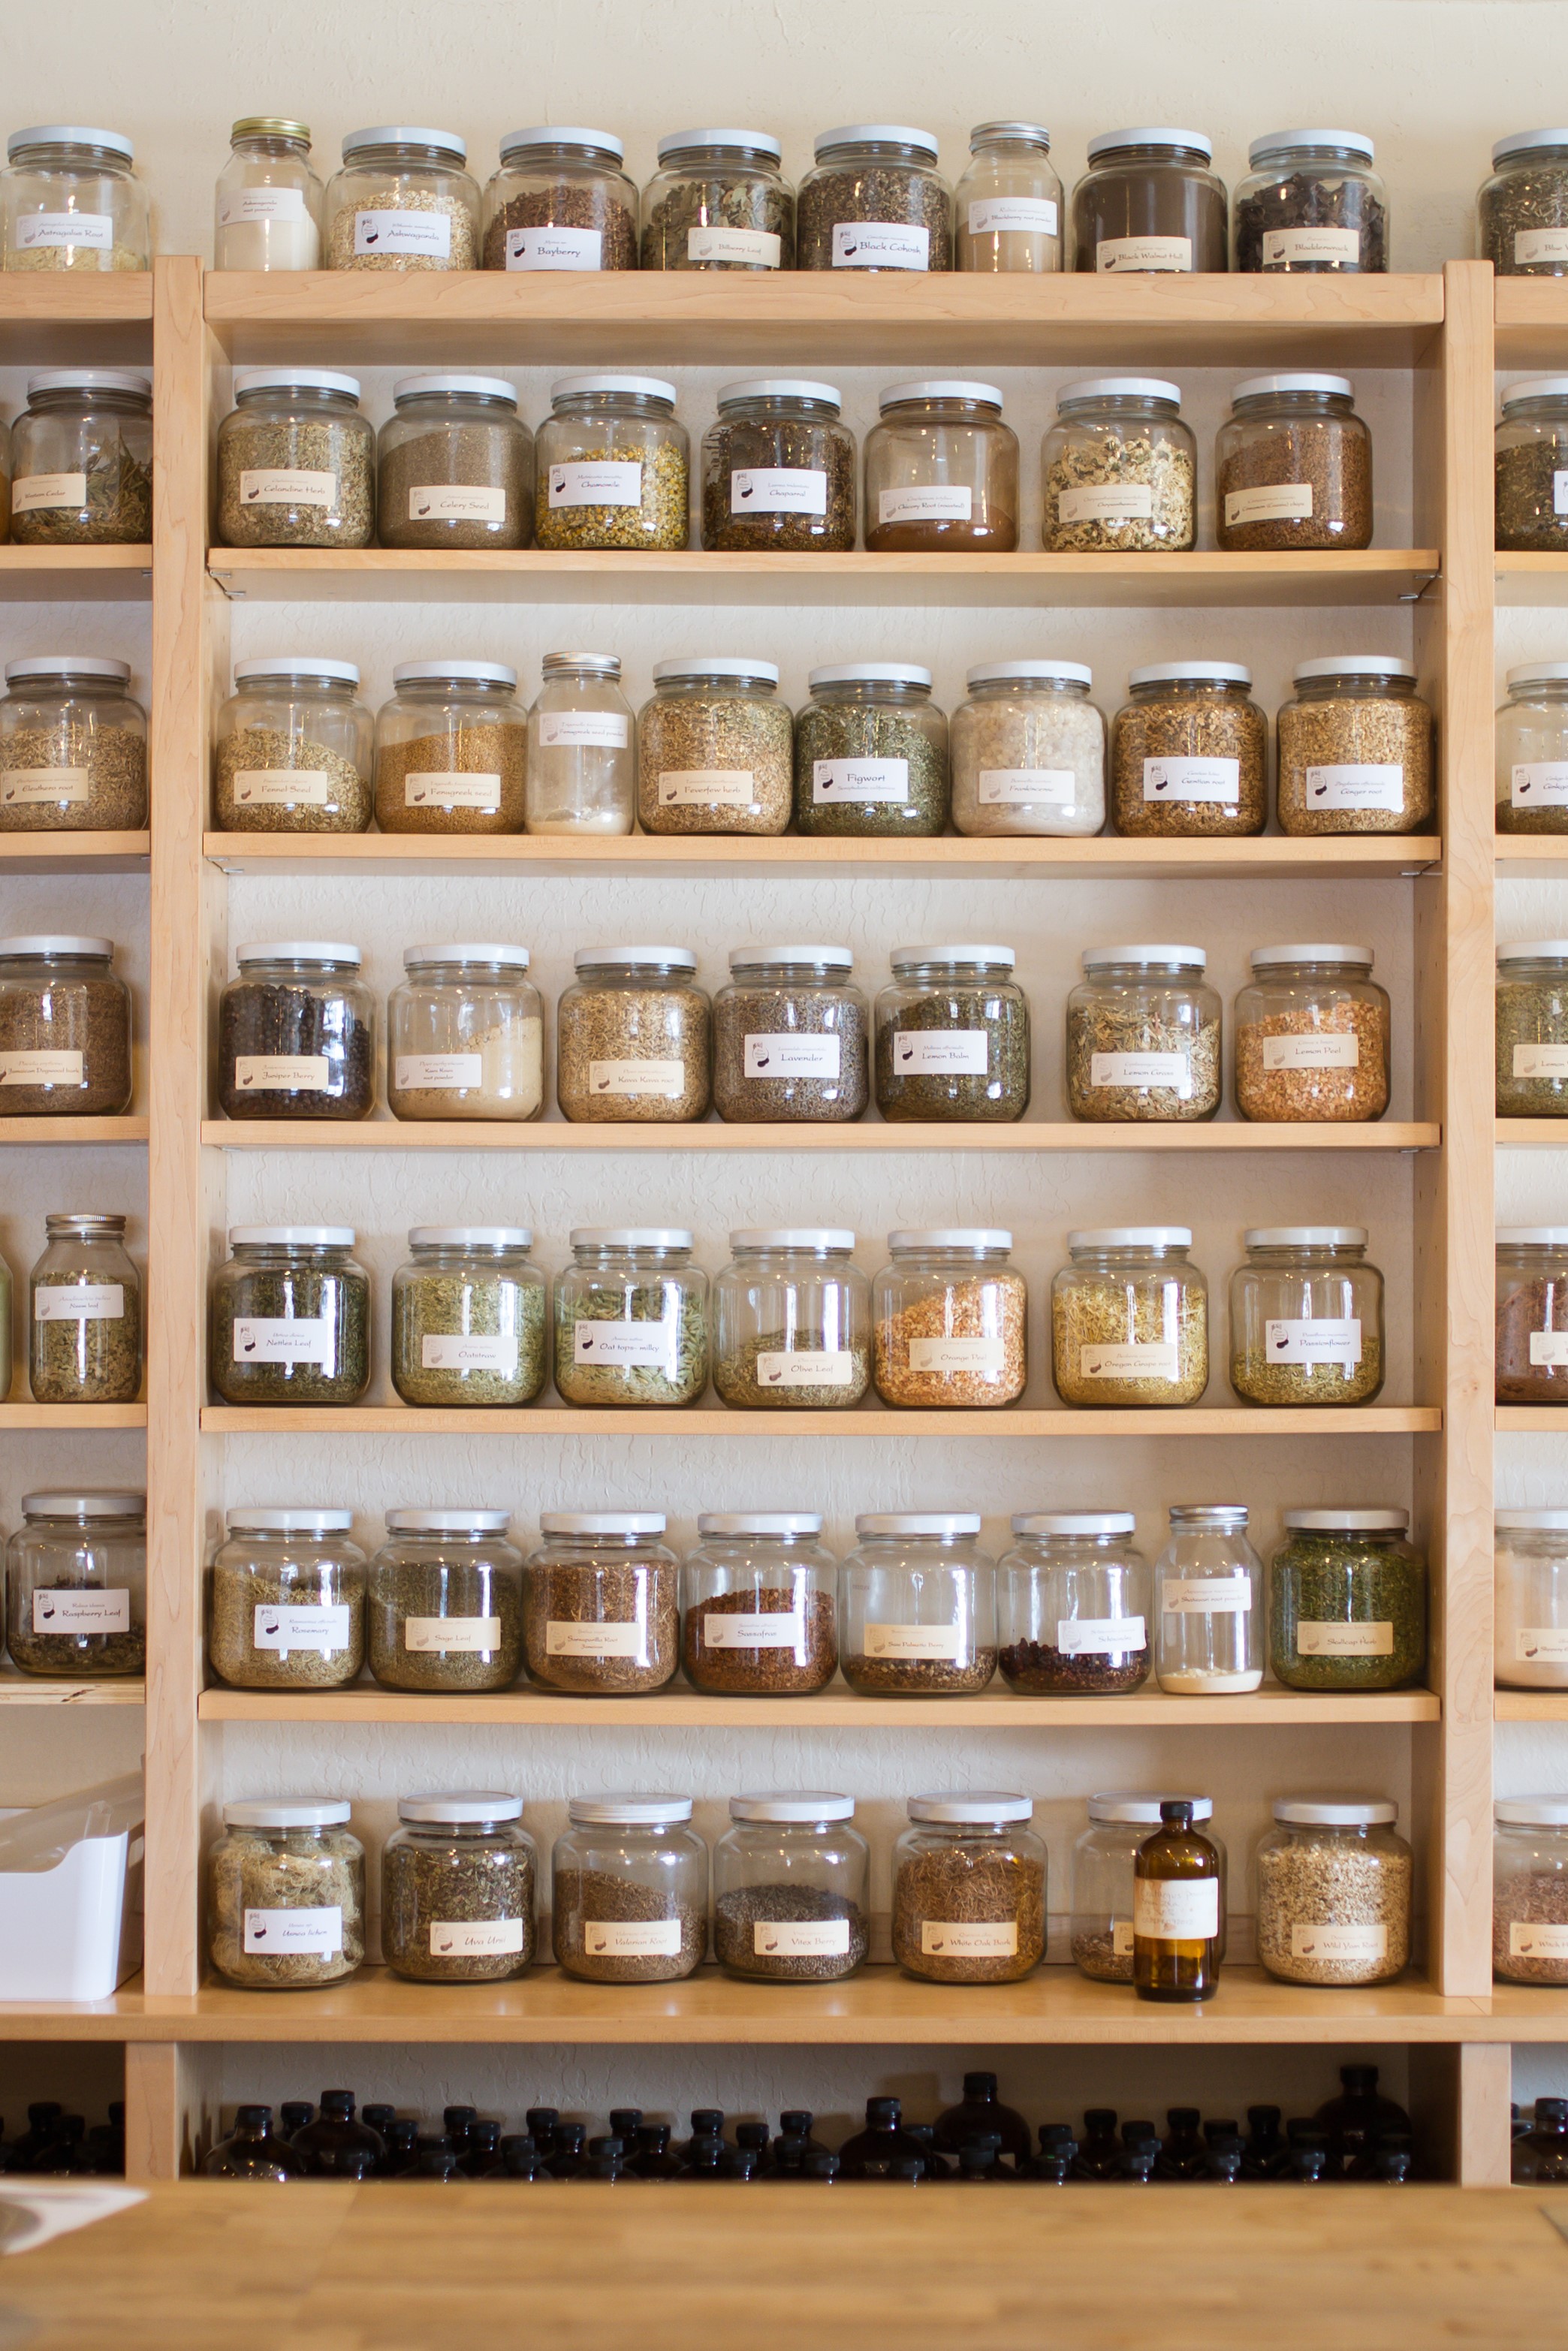 large-glass-jars-of-dried-medicinal-herbs-and-spices-lined-up-on-pale-wood-apothecary-shelves